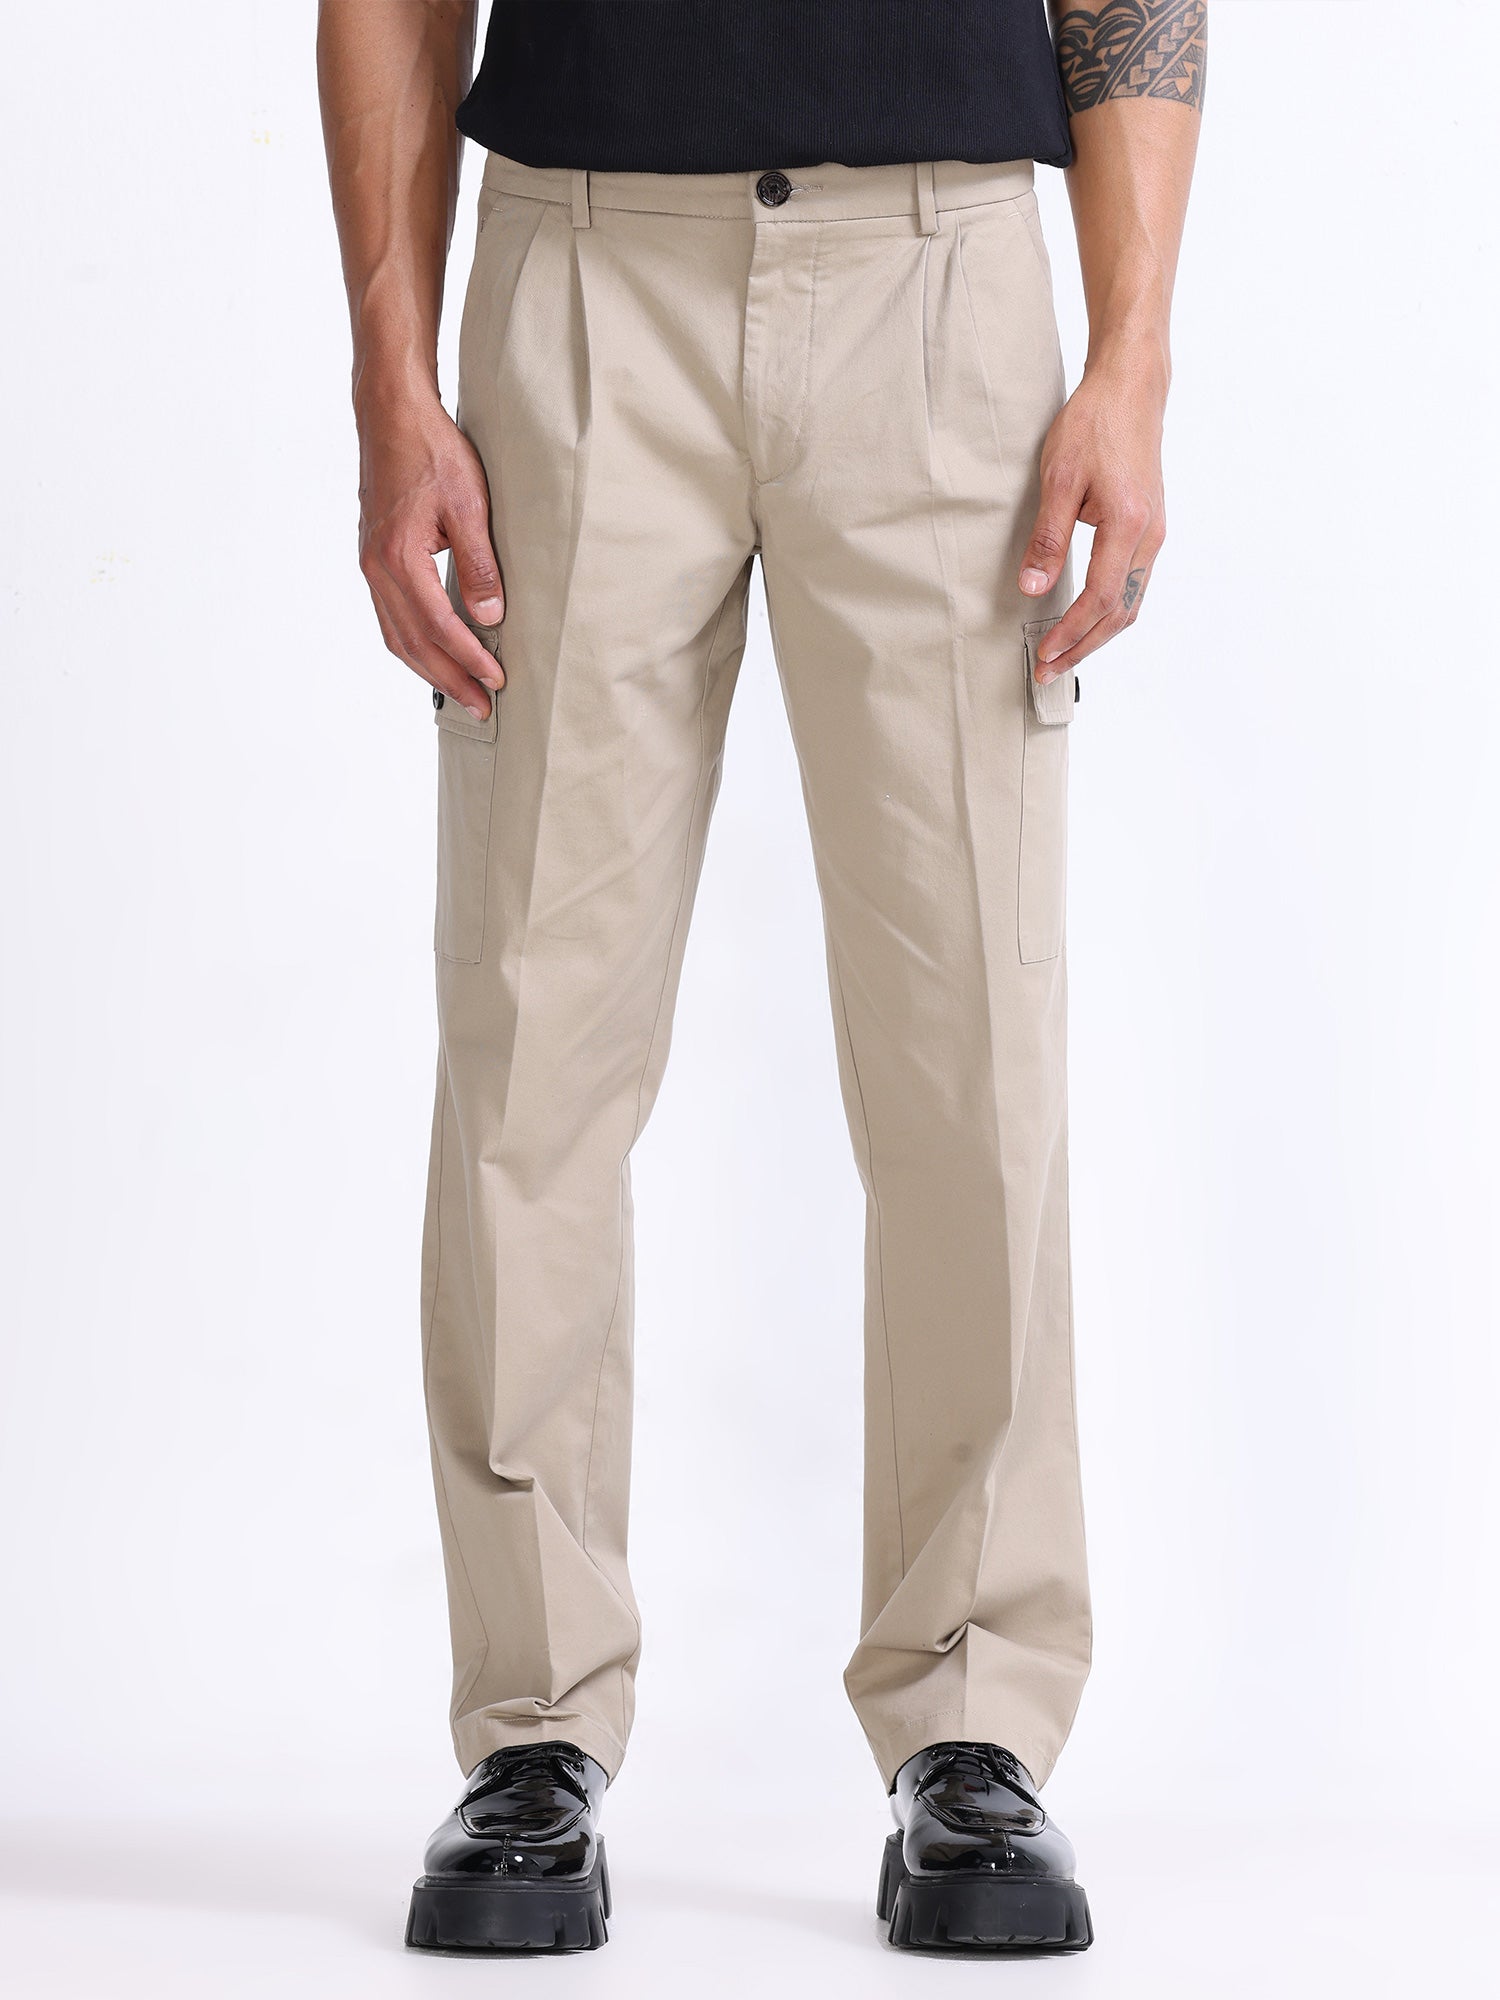 Khaki Textured All Weather Essential Stretch Pants